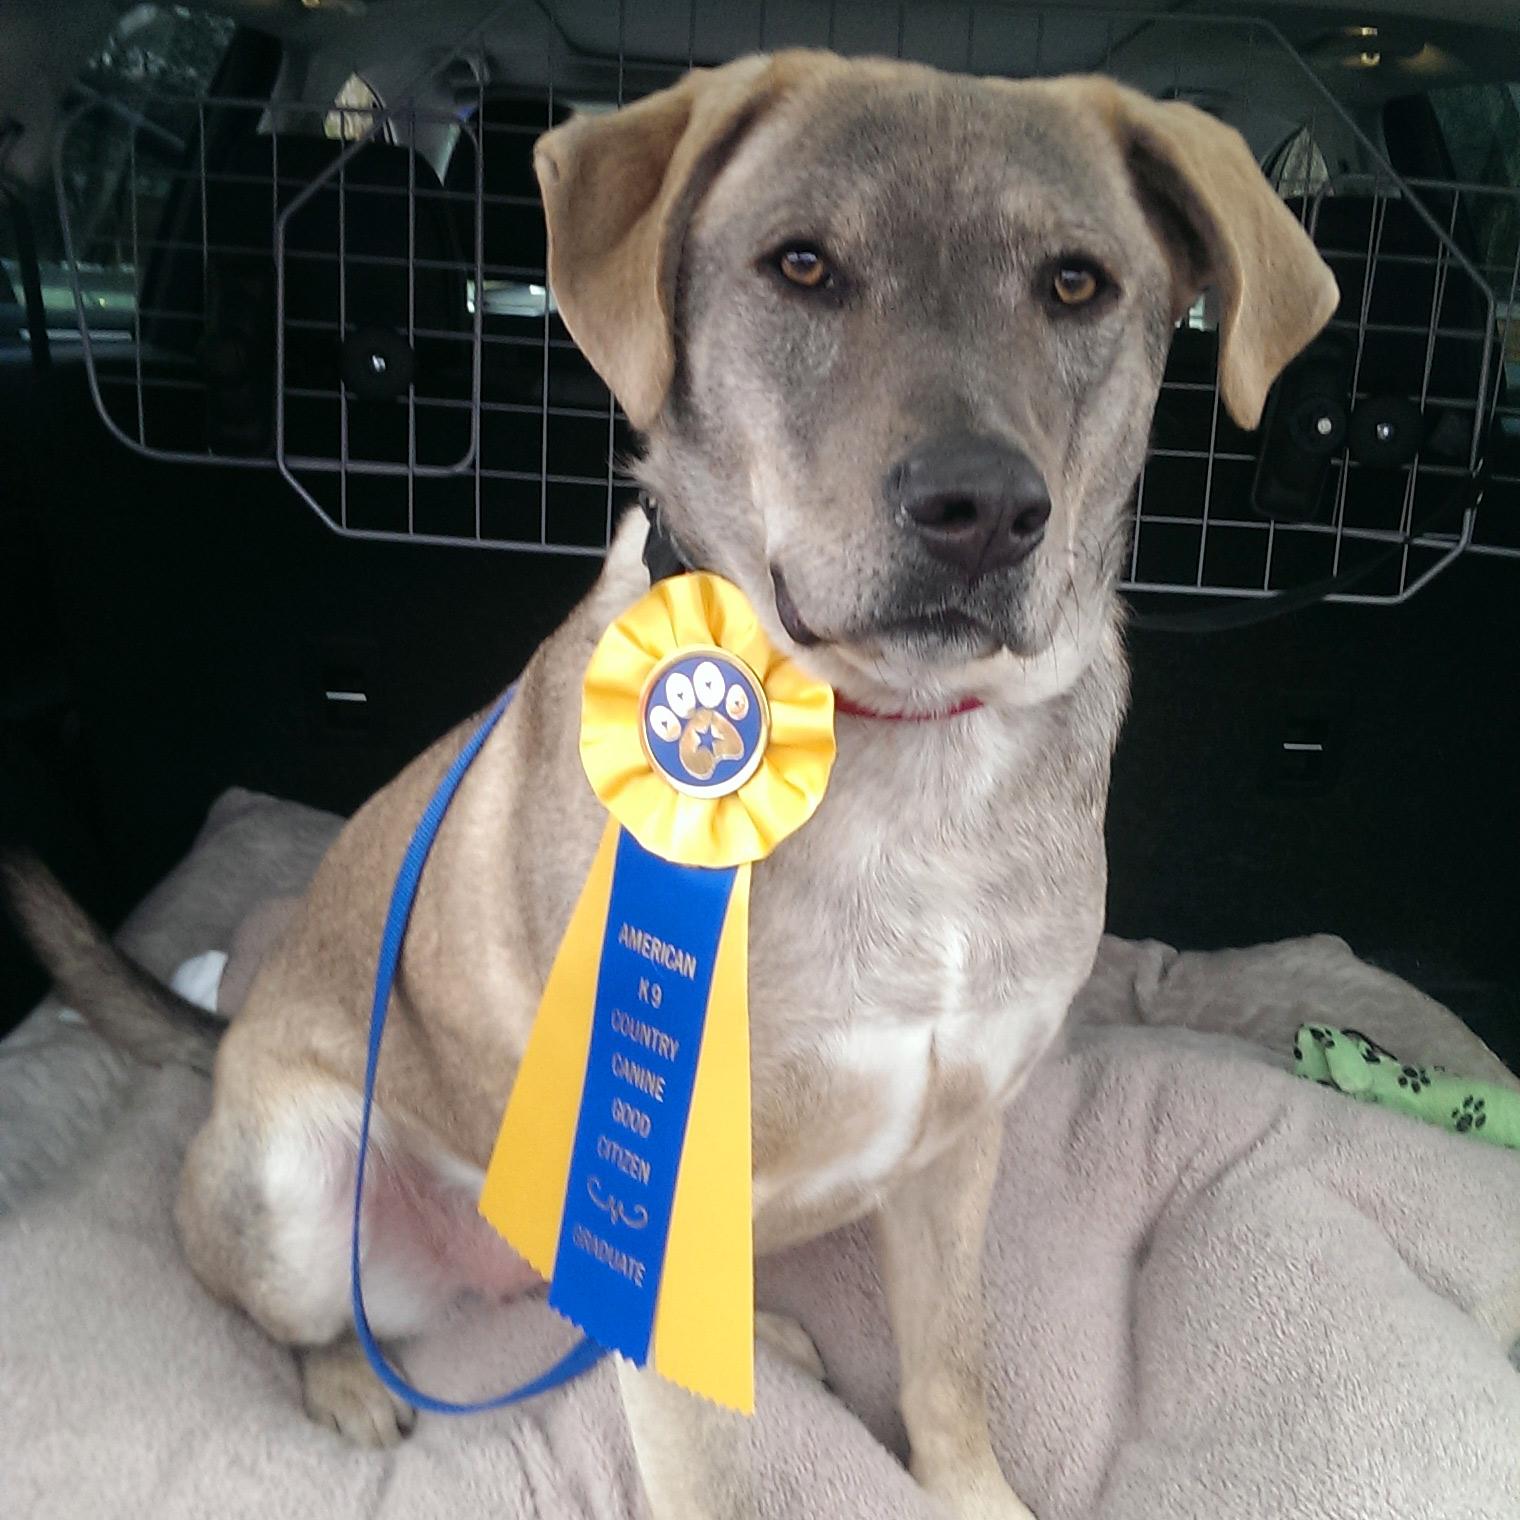 Toby passed the AKC Canine Good Citizen test. He is a 3-year-old rescue from Arkansas and LOVES the snow in New Hampshire where he now lives. – Lee Allison